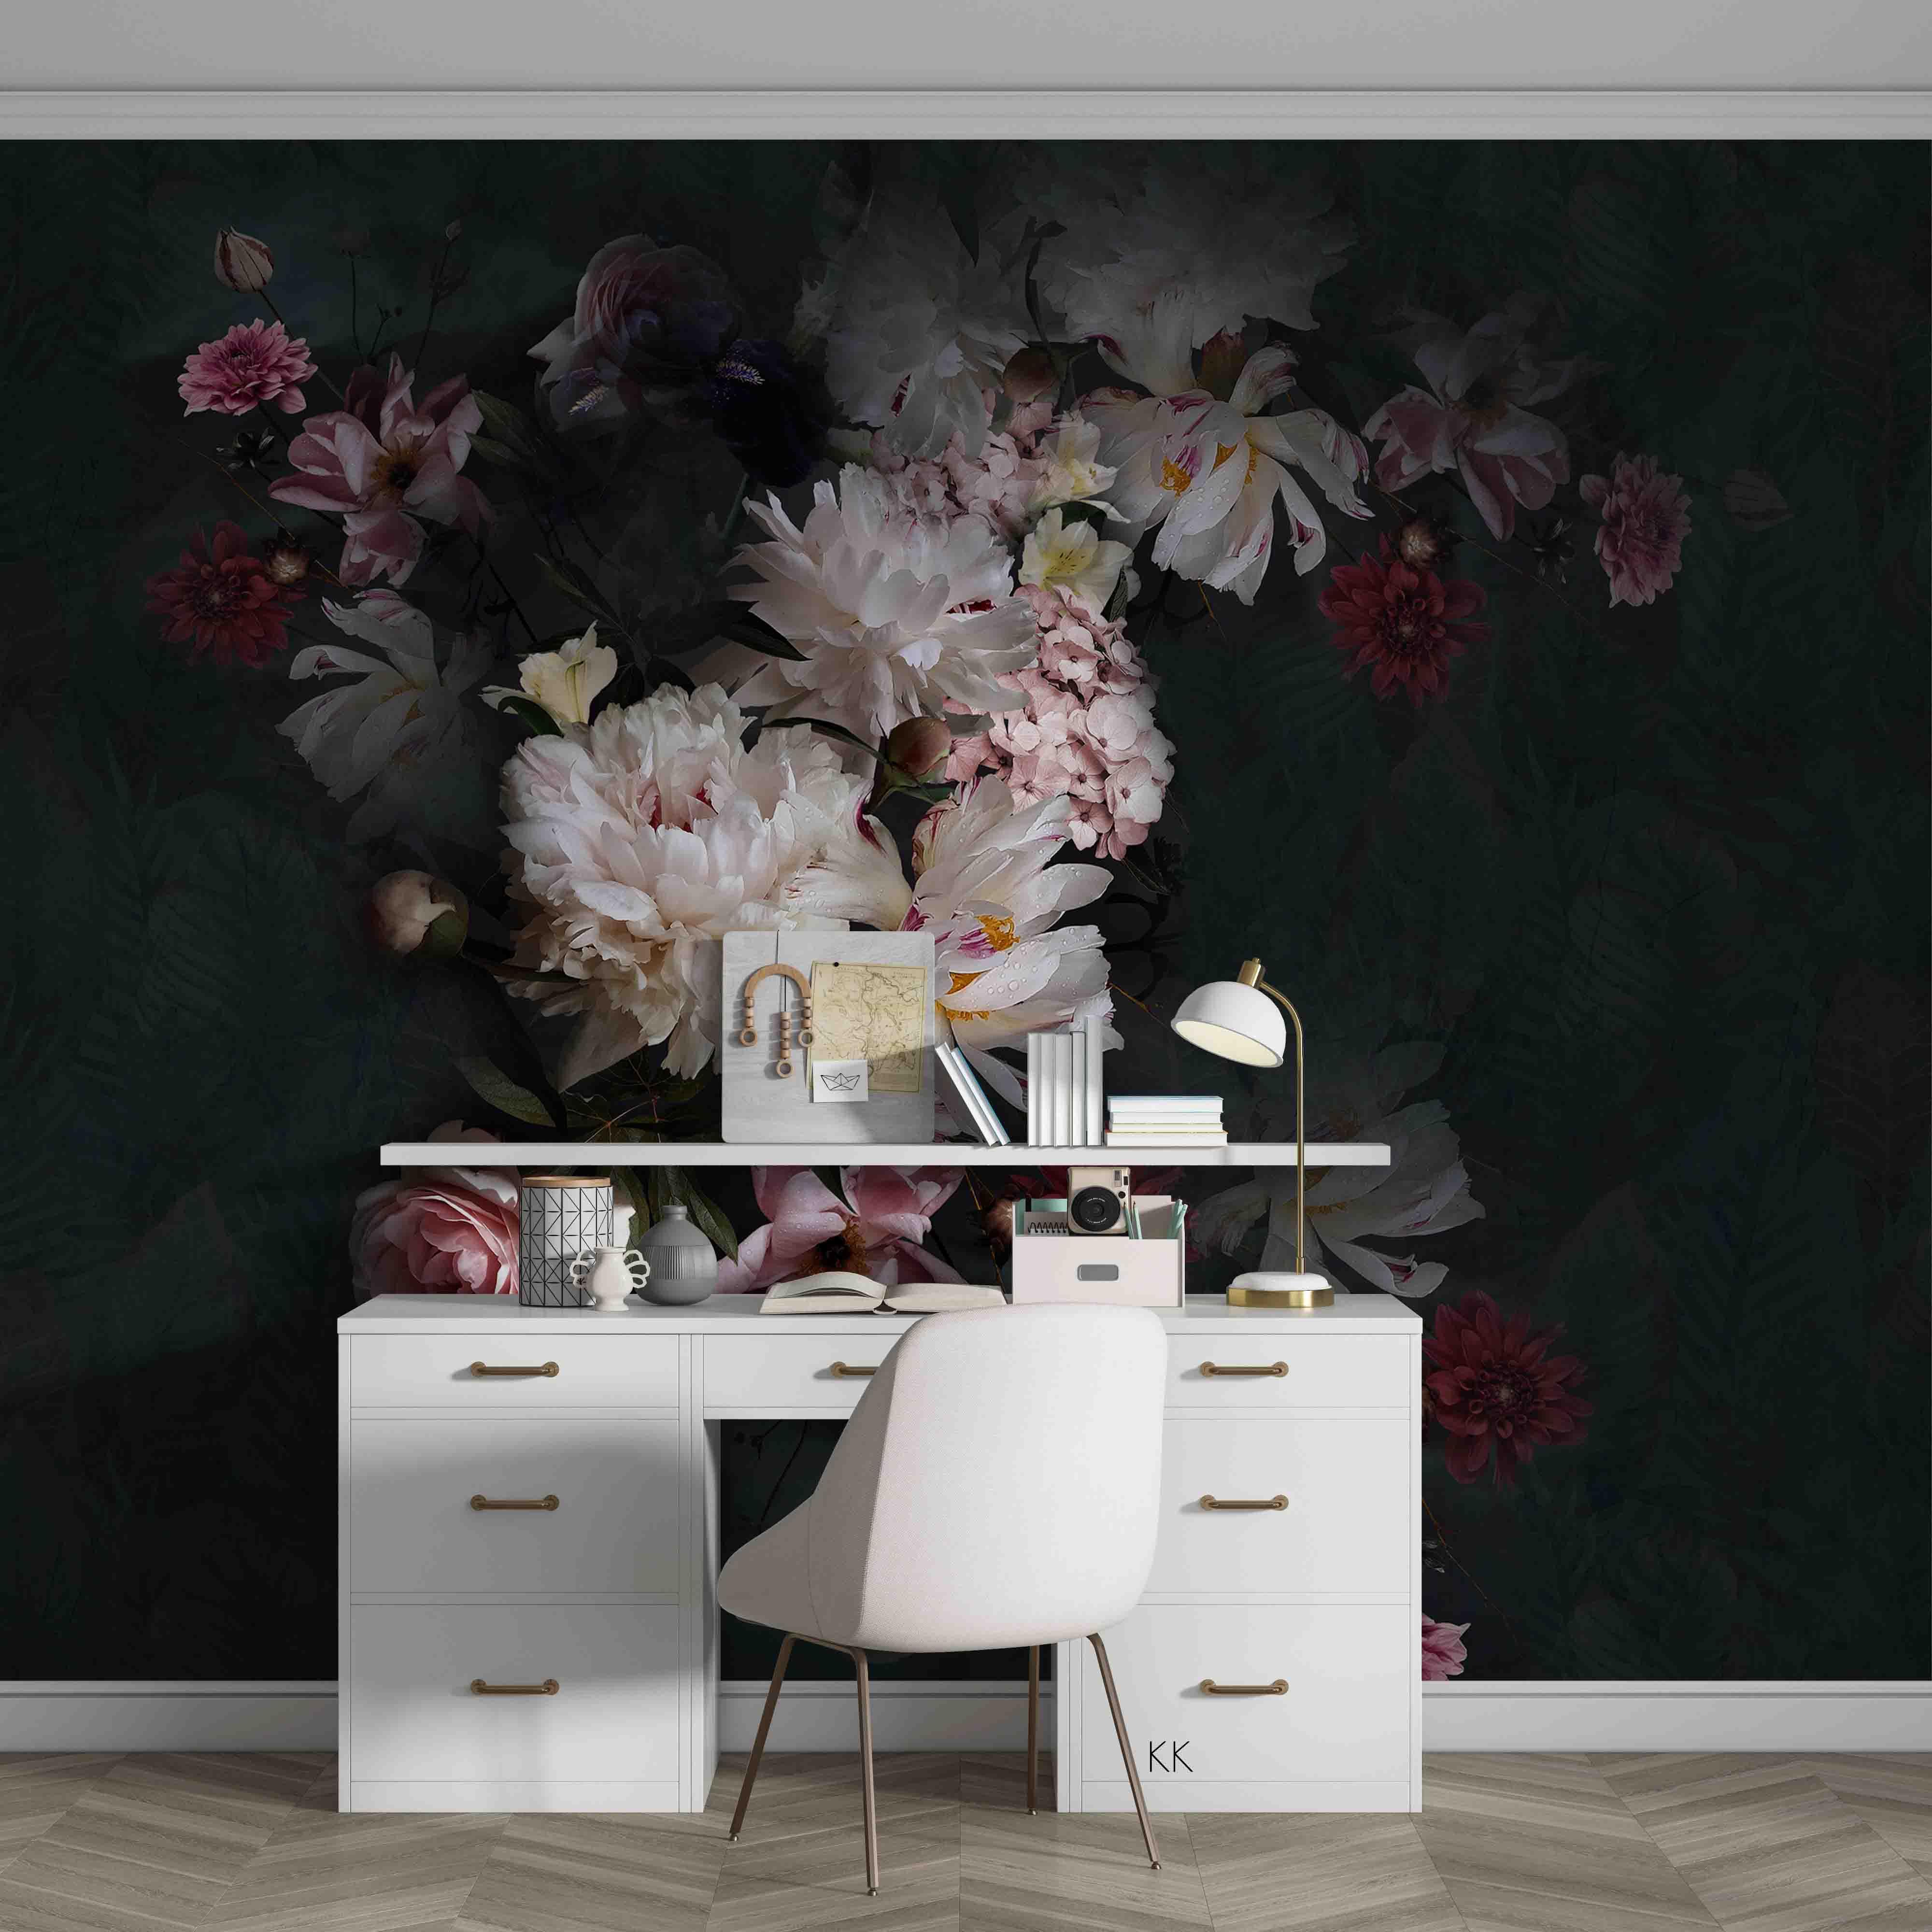 3D Vintage Blooming White Flowers Pattern Wall Mural Wallpaper GD 3523- Jess Art Decoration